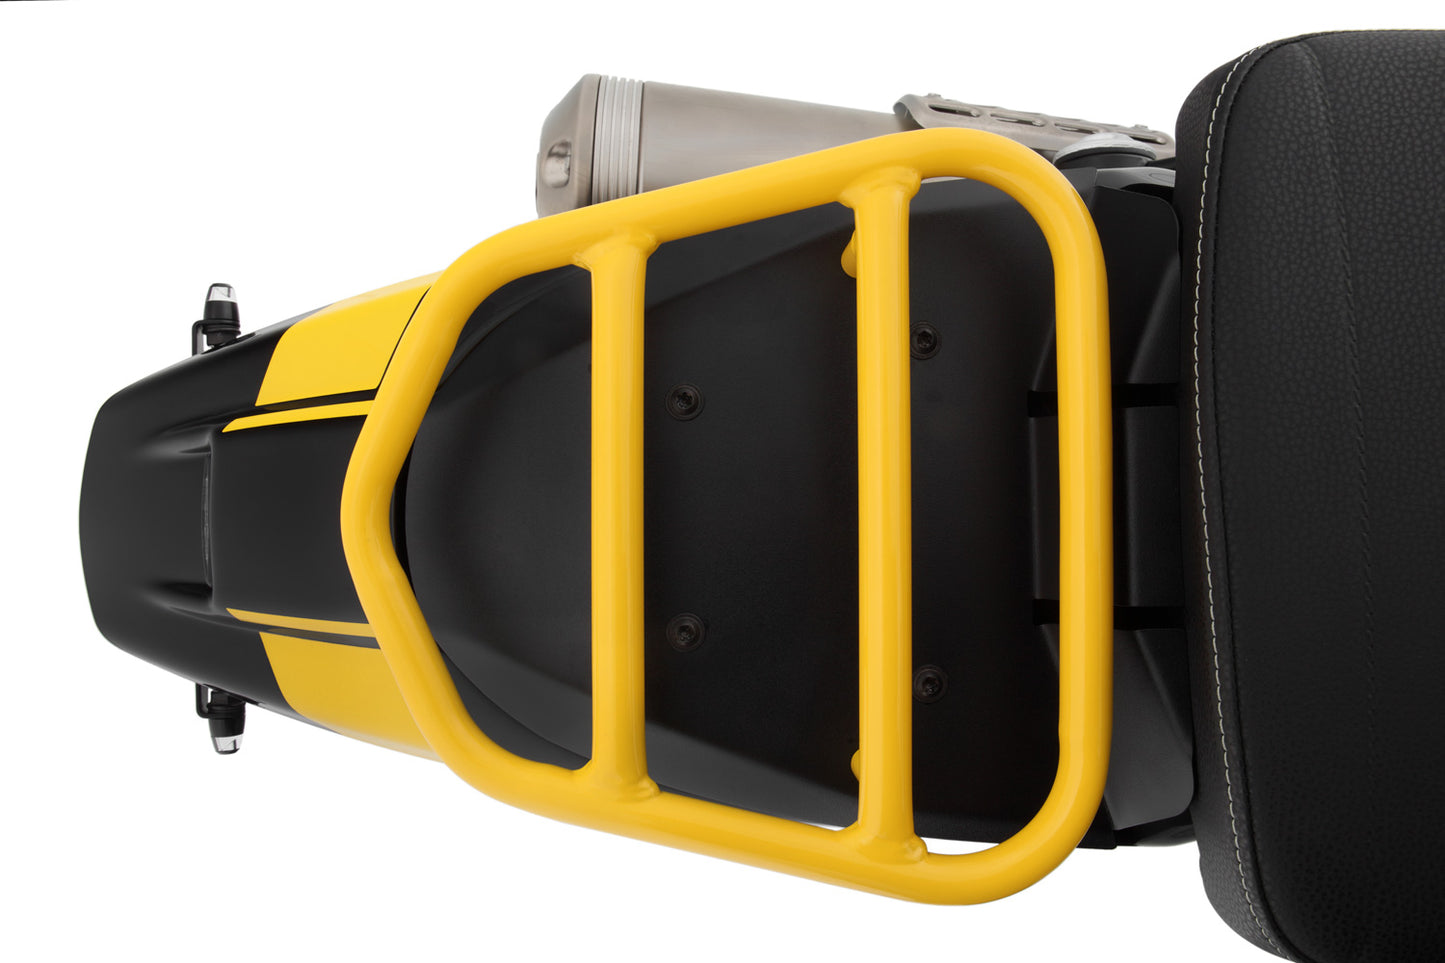 Wunderlich pillion luggage rack “Rallye” - with passenger frame - yellow | Edition 40 Years GS